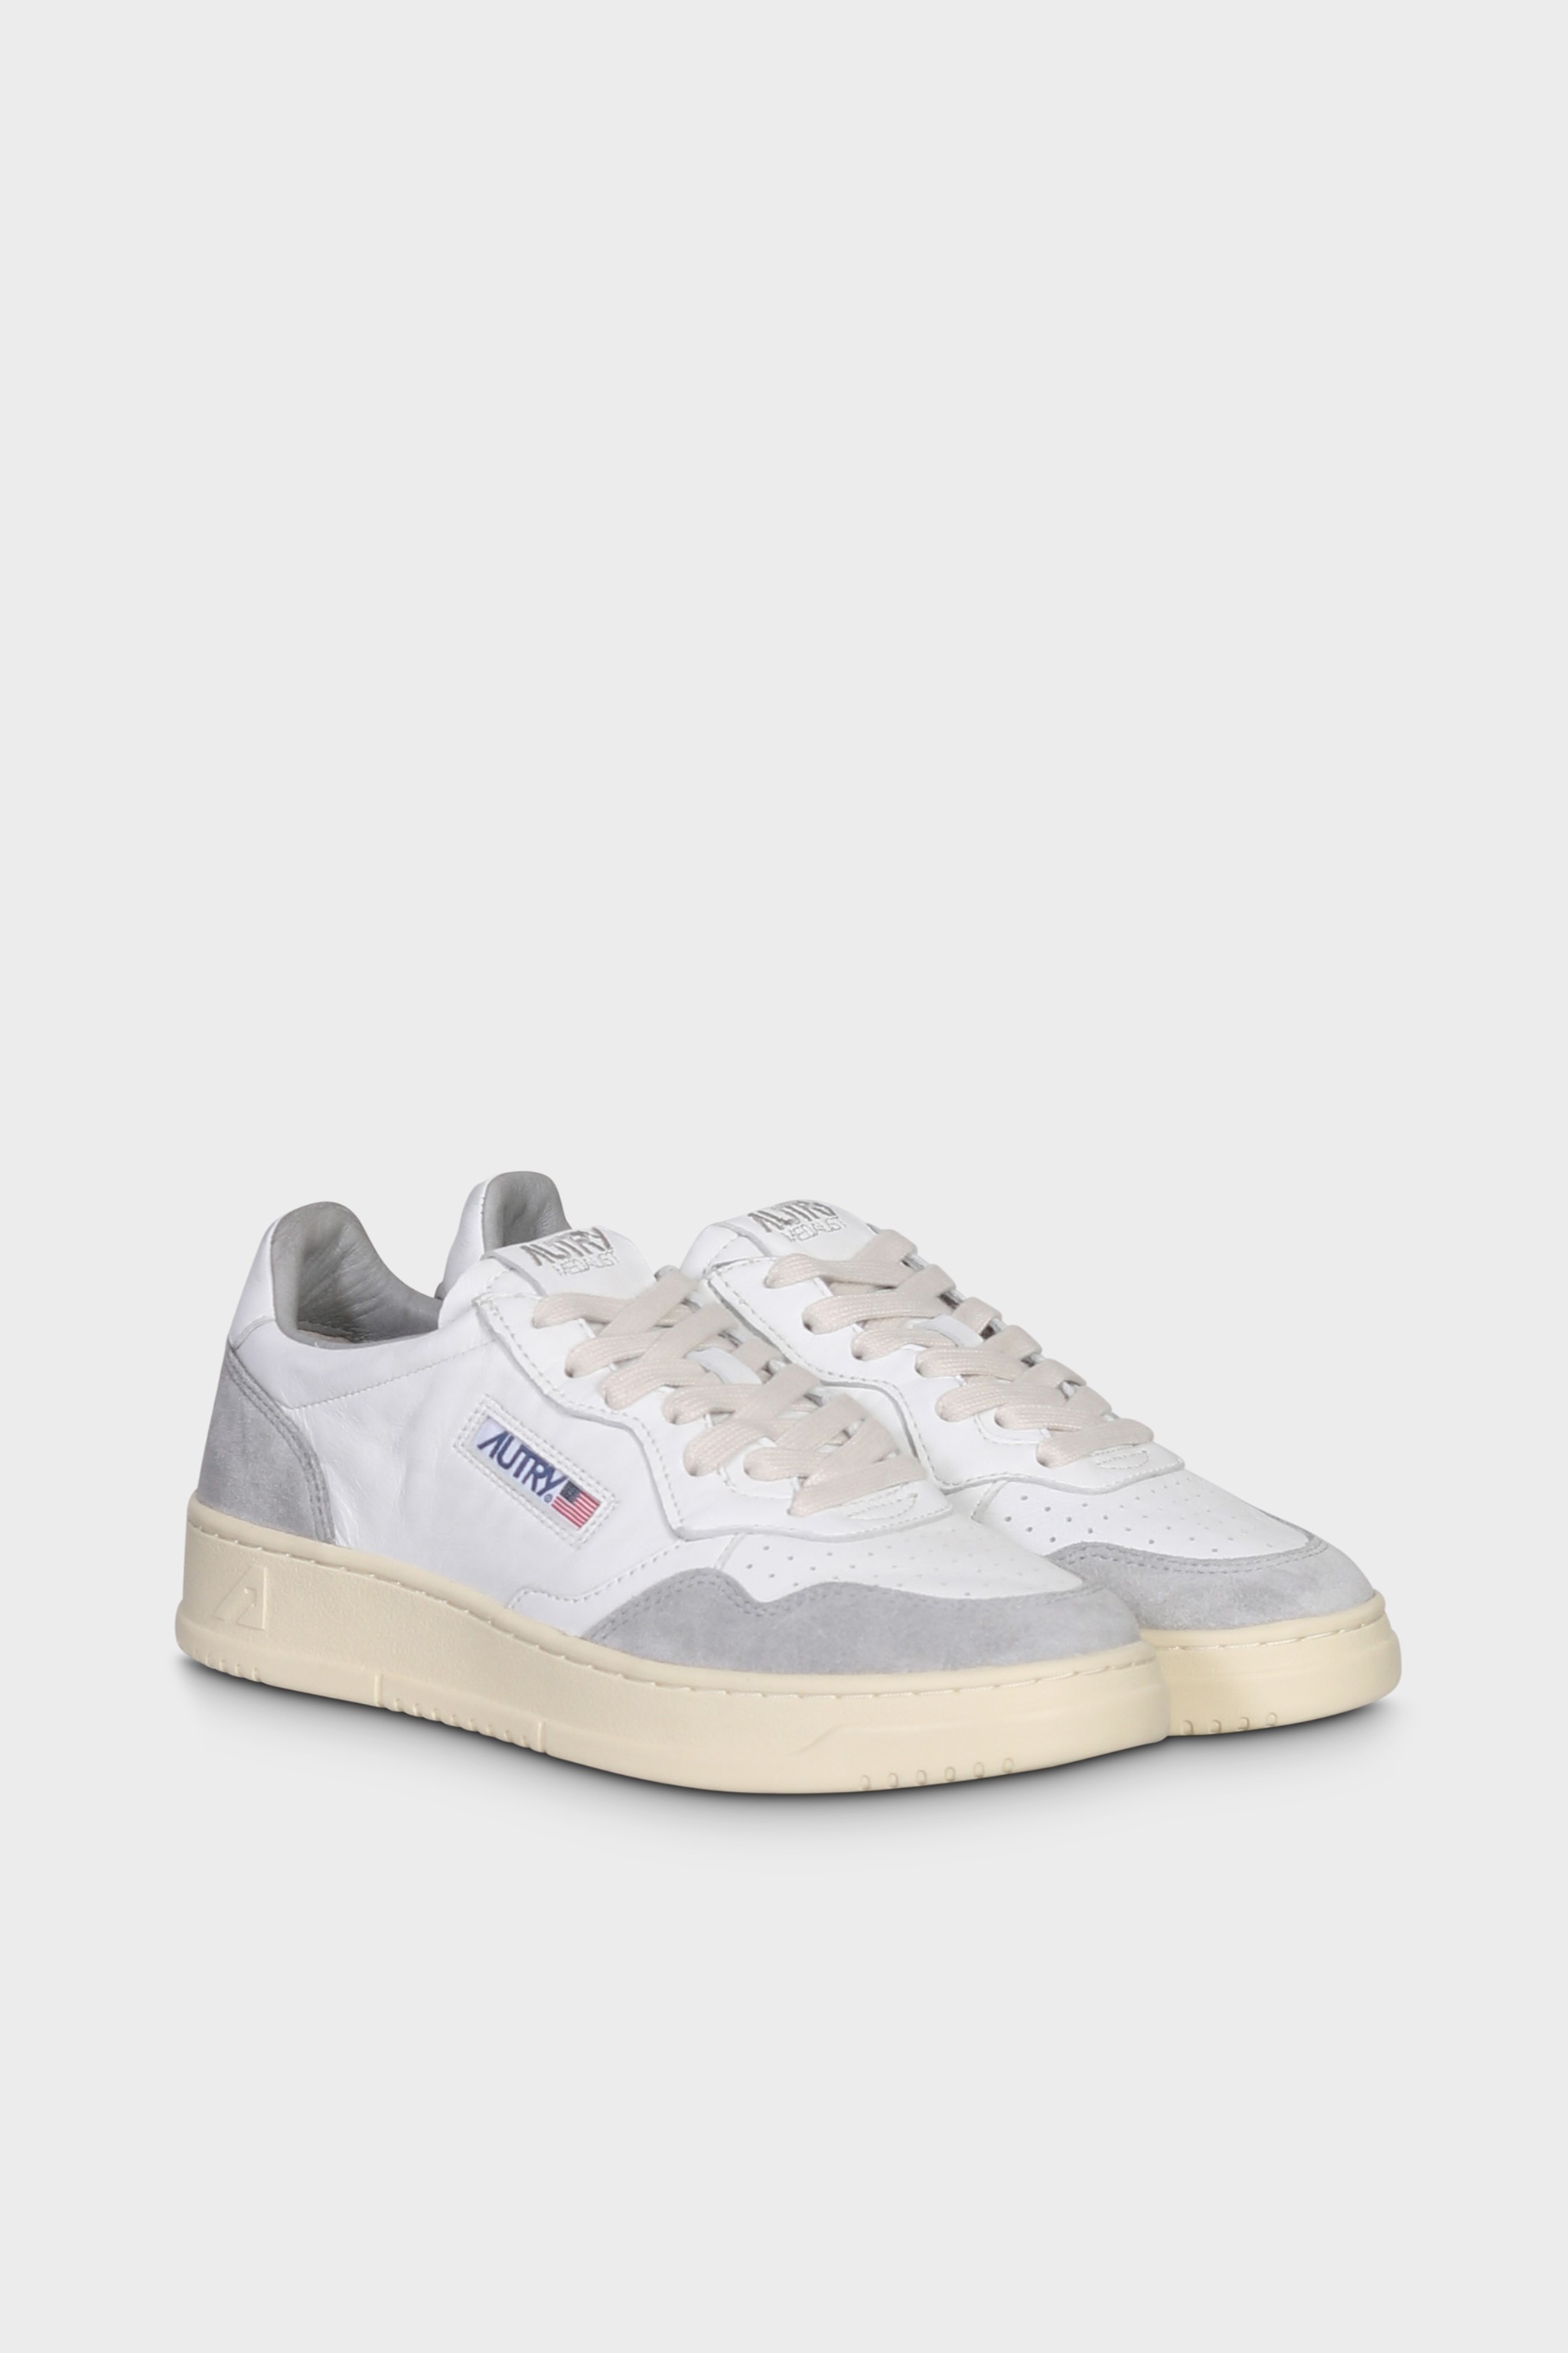 AUTRY ACTION SHOES Medalist Low Sneaker Goat Suede White/Grey